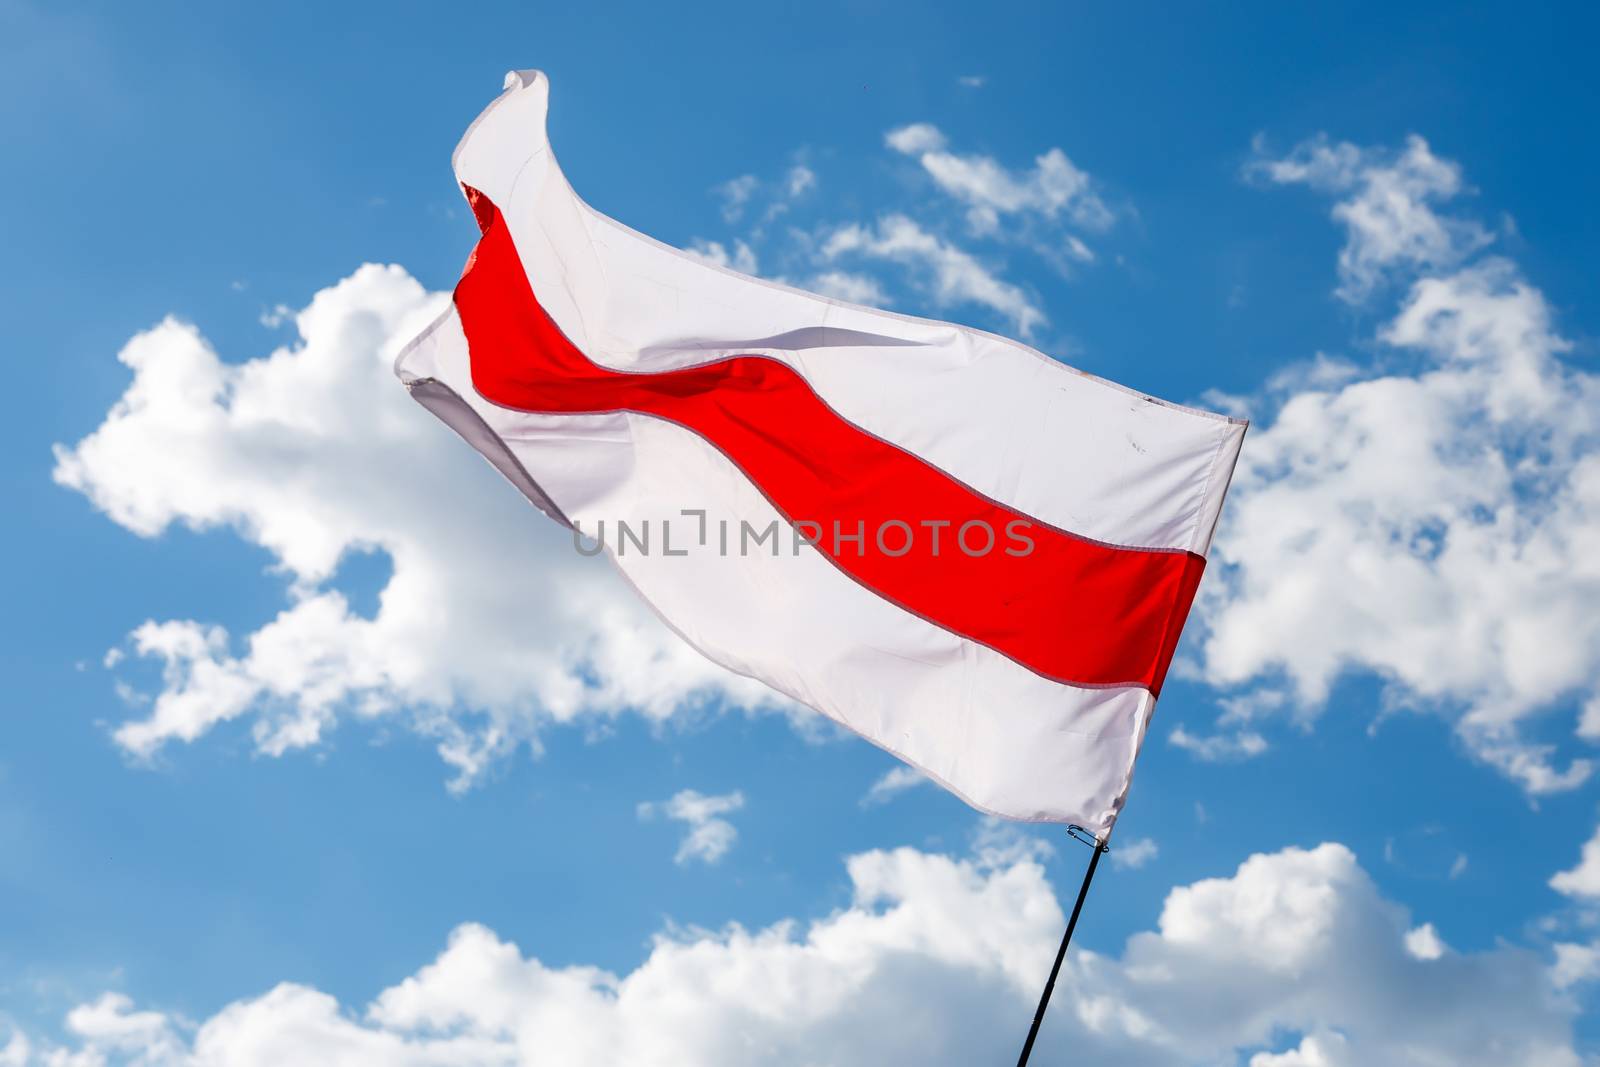 New Belarus white-red-white flag. Protest and historical authentic flag.